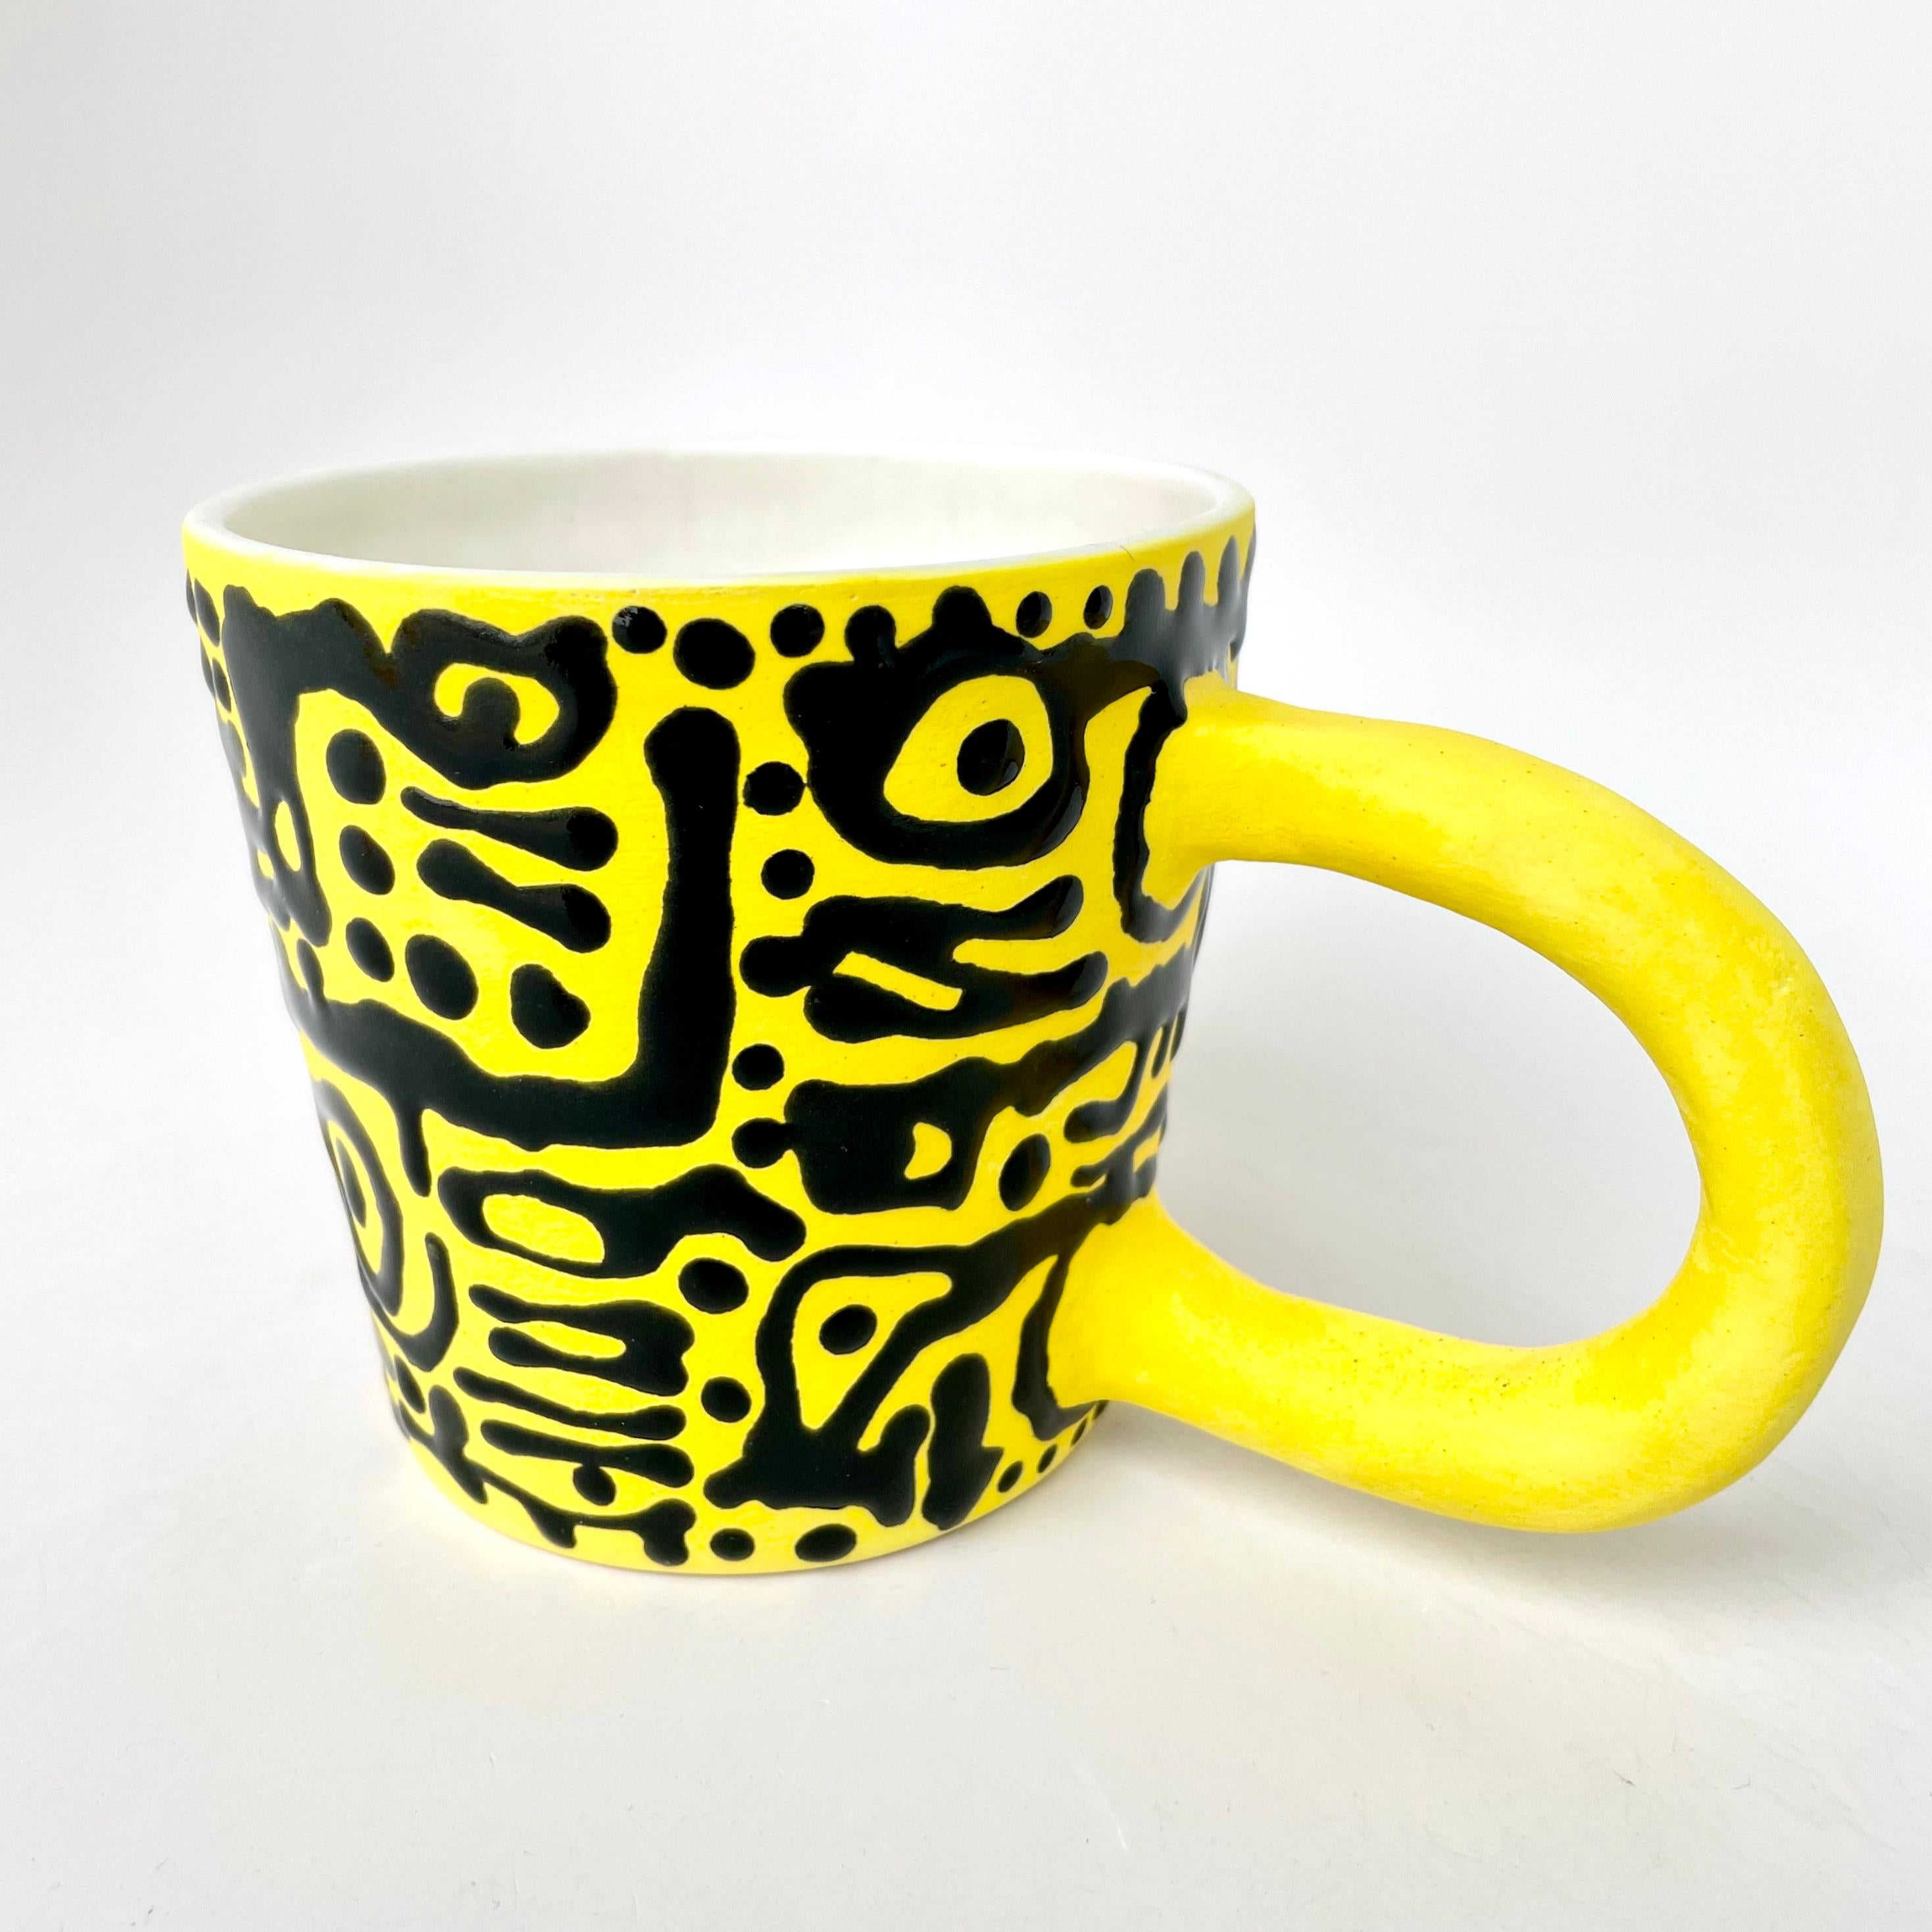 North American Pop Tribal Tumbler, Handmade and Food Safe, by Artist Stef Duffy For Sale